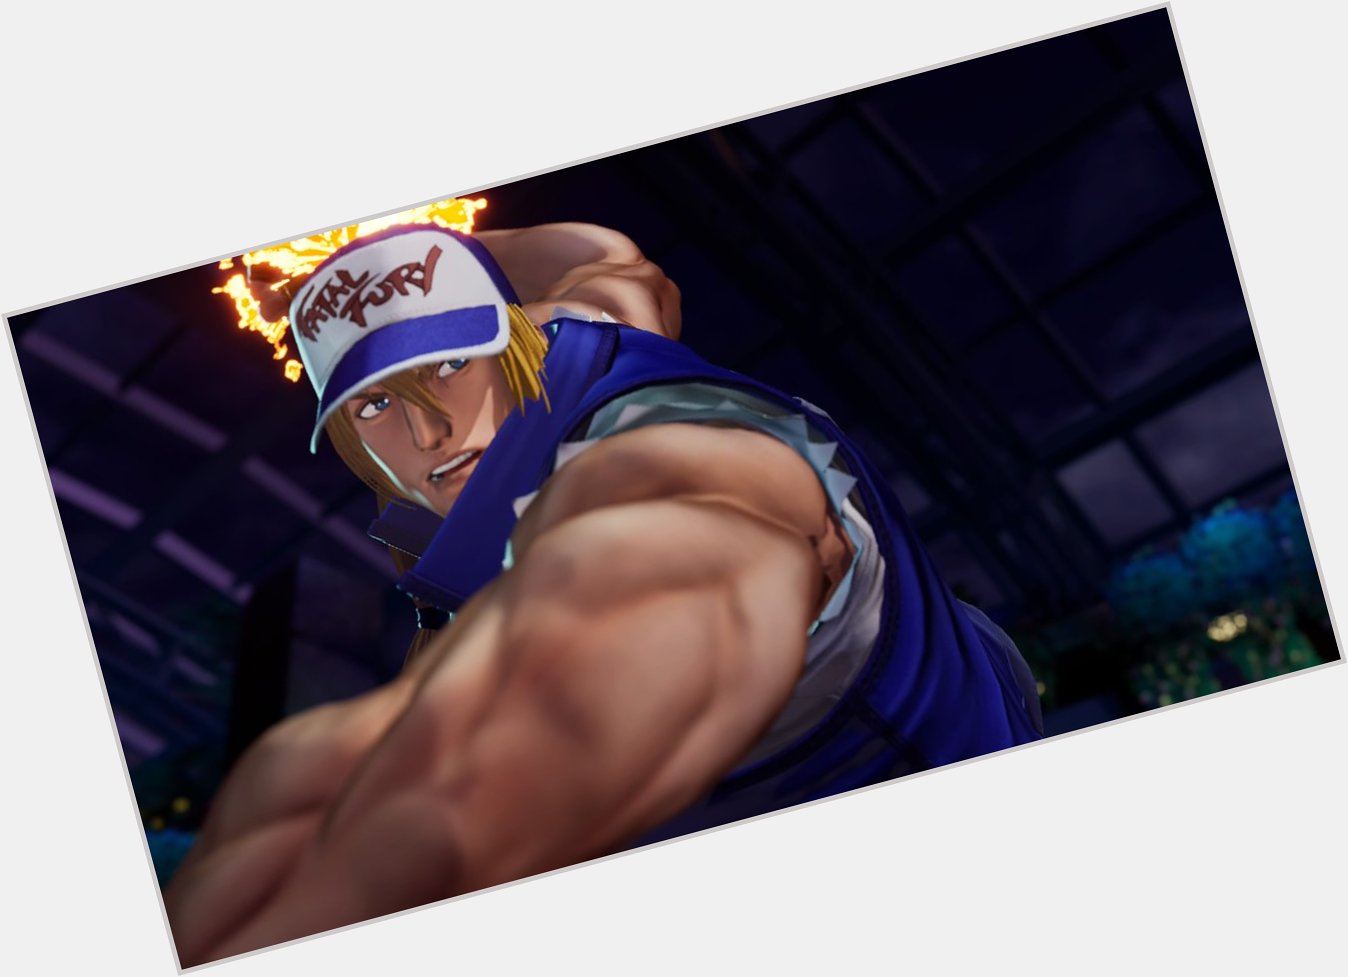 Happy Birthday to one of my favorite fighting game characters. Terry Bogard!!!   